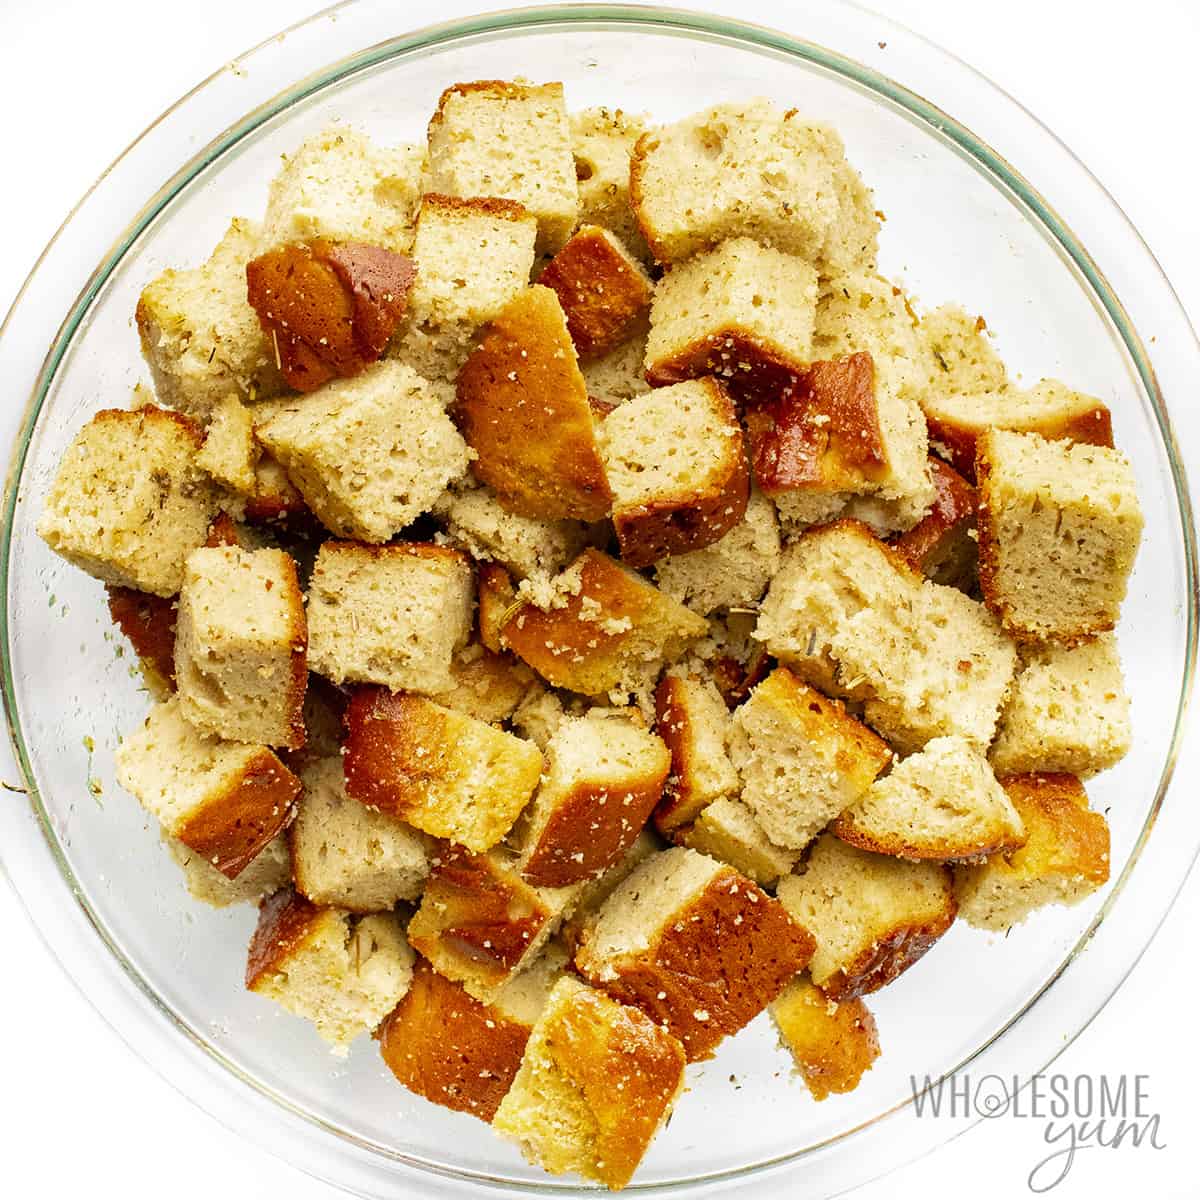 Seasonings and bread cubes mixed in a big bowl